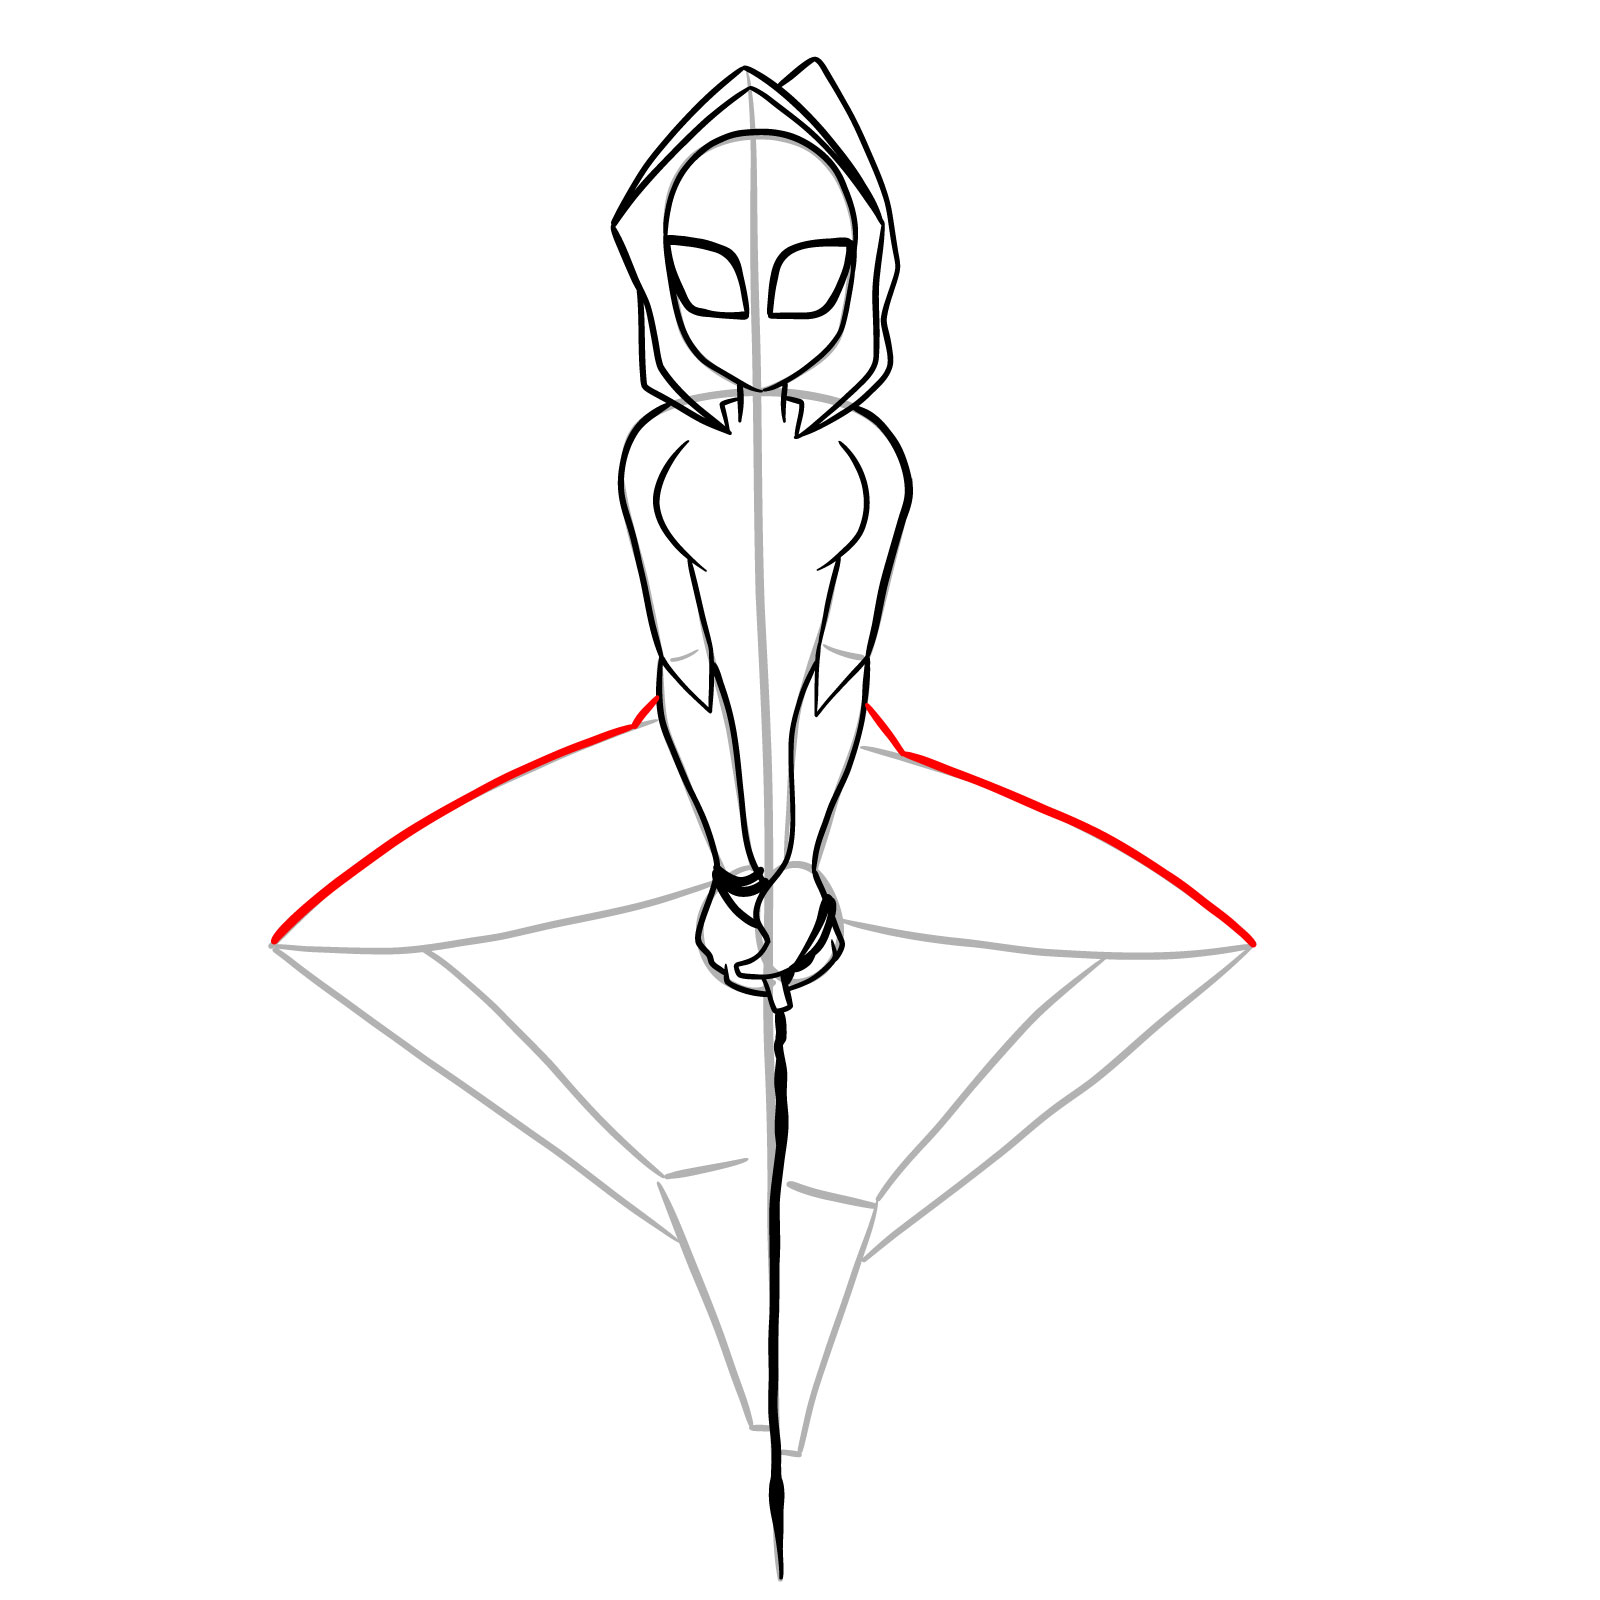 How to draw Spider-Gwen hanging on a web - step 20